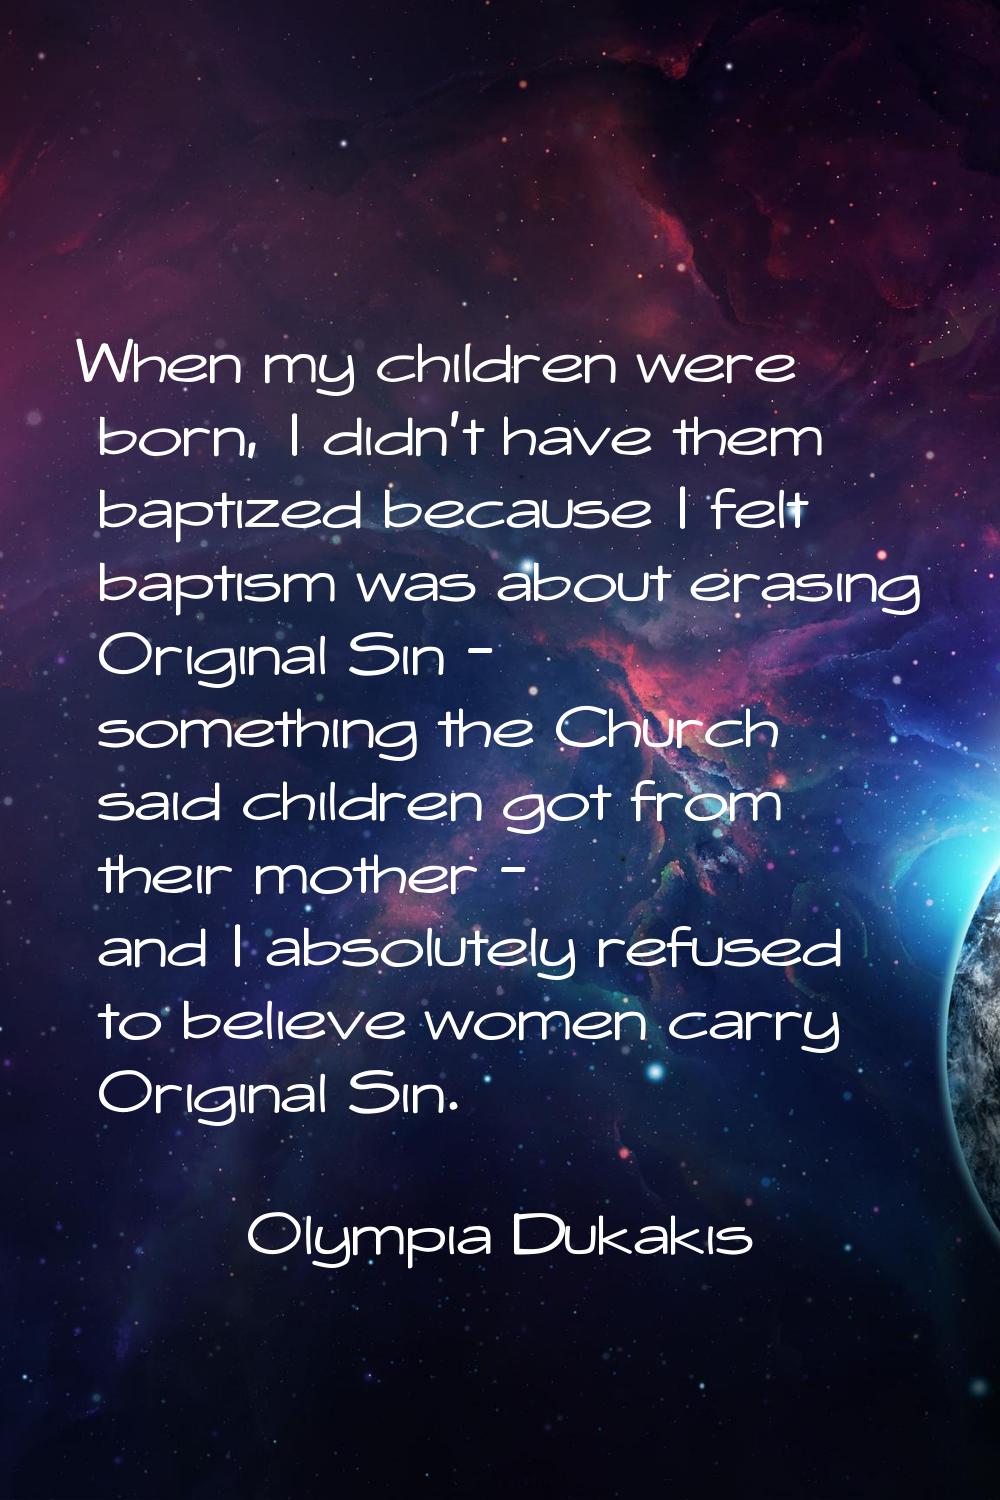 When my children were born, I didn't have them baptized because I felt baptism was about erasing Or